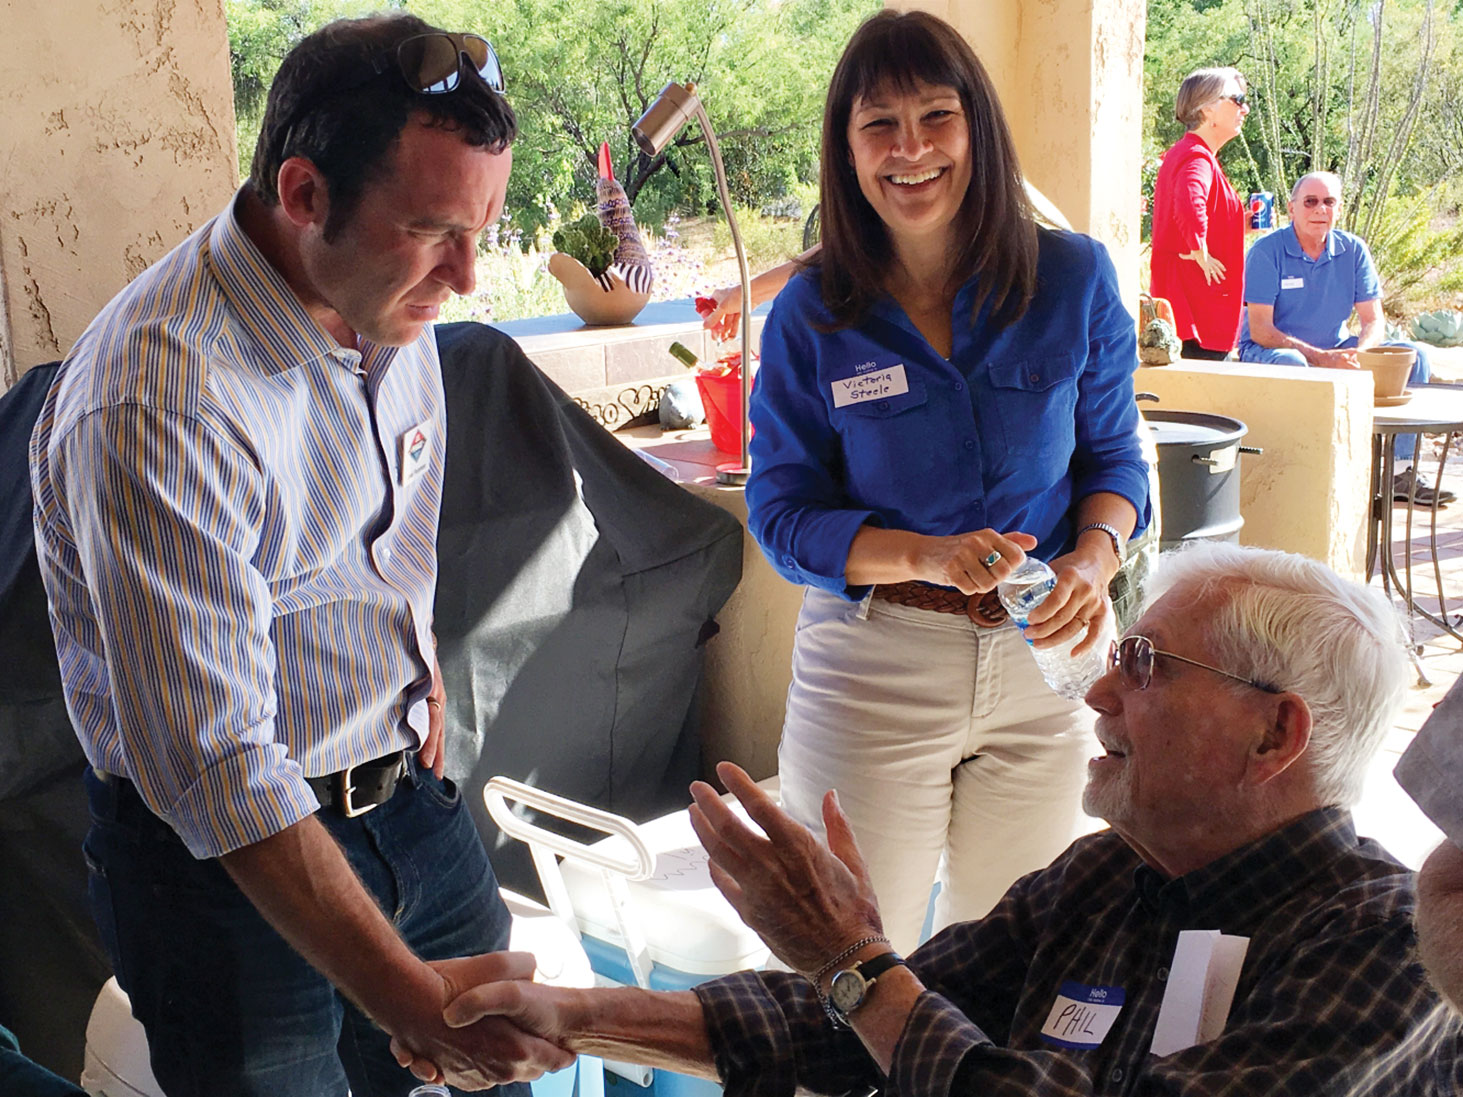 CD2 candidate Victoria Steele and Pima County Attorney candidate Joel Fineman chat with guest Phil Katz (seated).